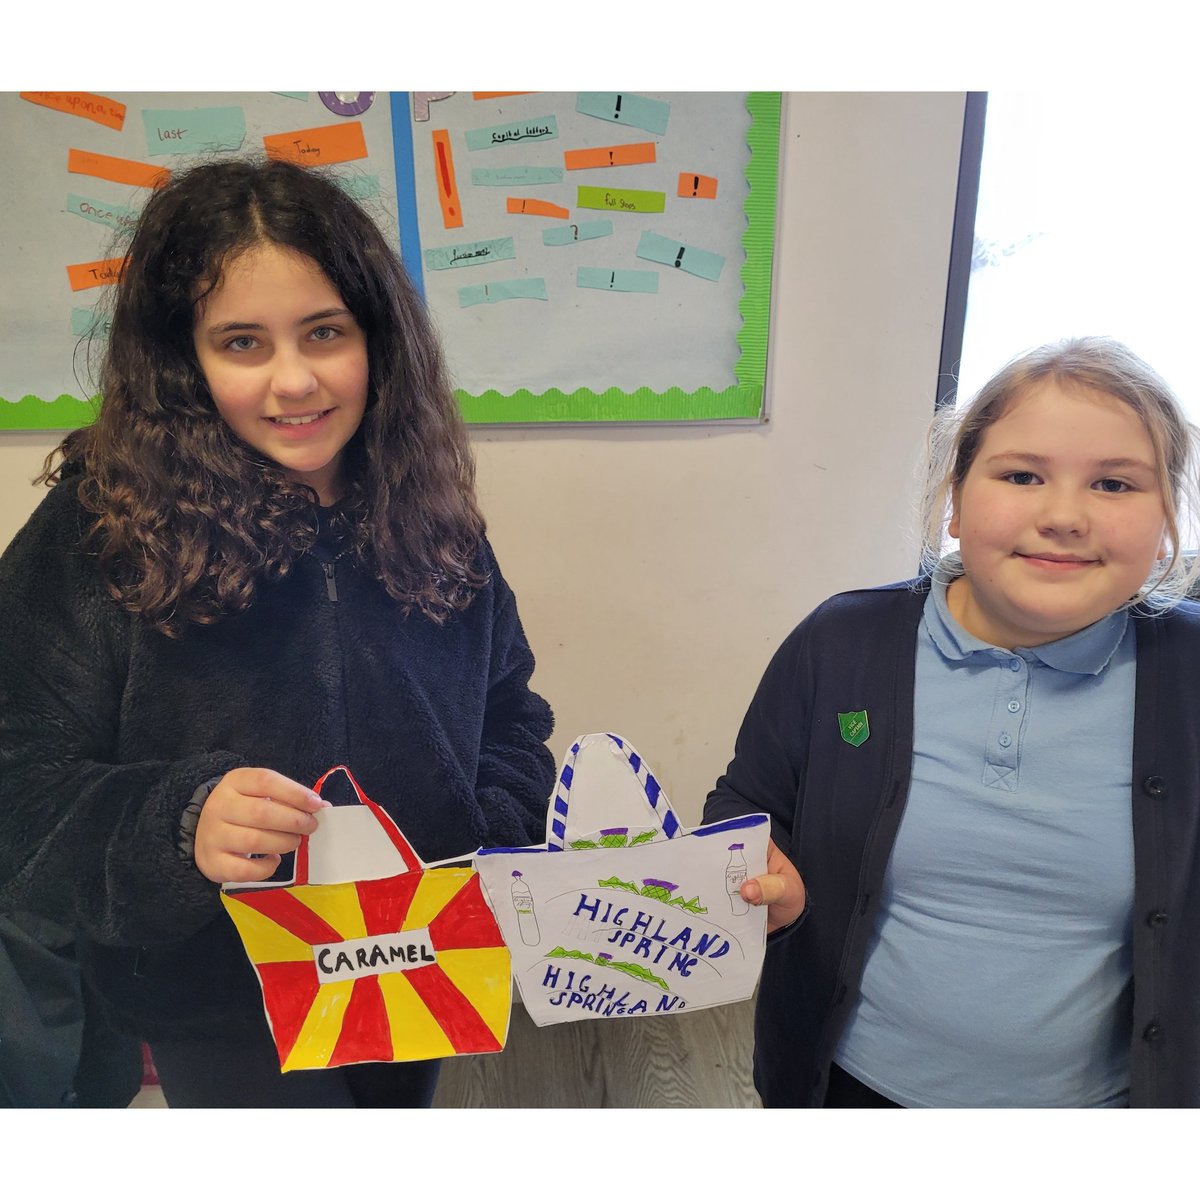 Just some of P6's fantastic designs which were inspired by @gilliankyle. They chose a Scottish product to base their designs on and created a concept for either a bag, mug or apron. Some very eye-catching creations! @stfrancisps